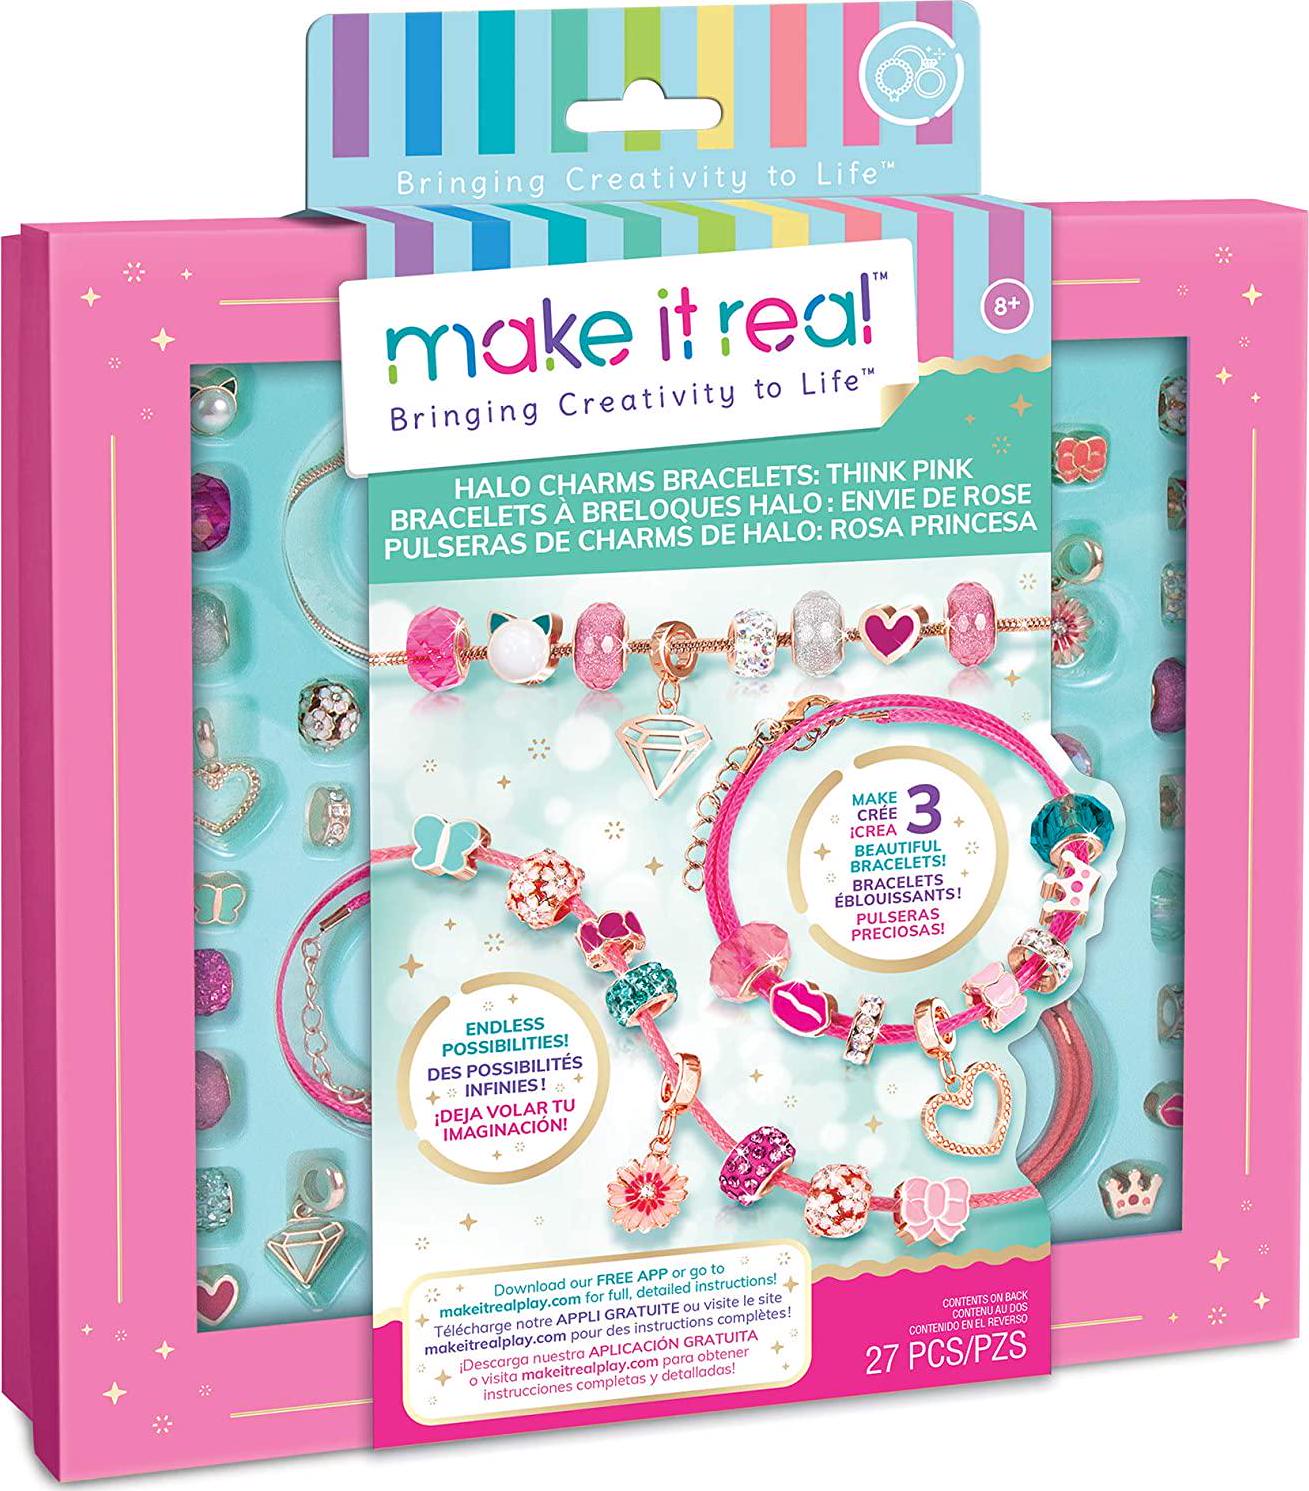 Make It Real, Make It Real - Halo Charms Bracelets Think Pink - DIY Charm Bracelet Making Kit - Friendship Bracelet Kit with Beads, Charms and Cord - Arts and Crafts Bead Kit for Girls - Makes 3 Bracelets